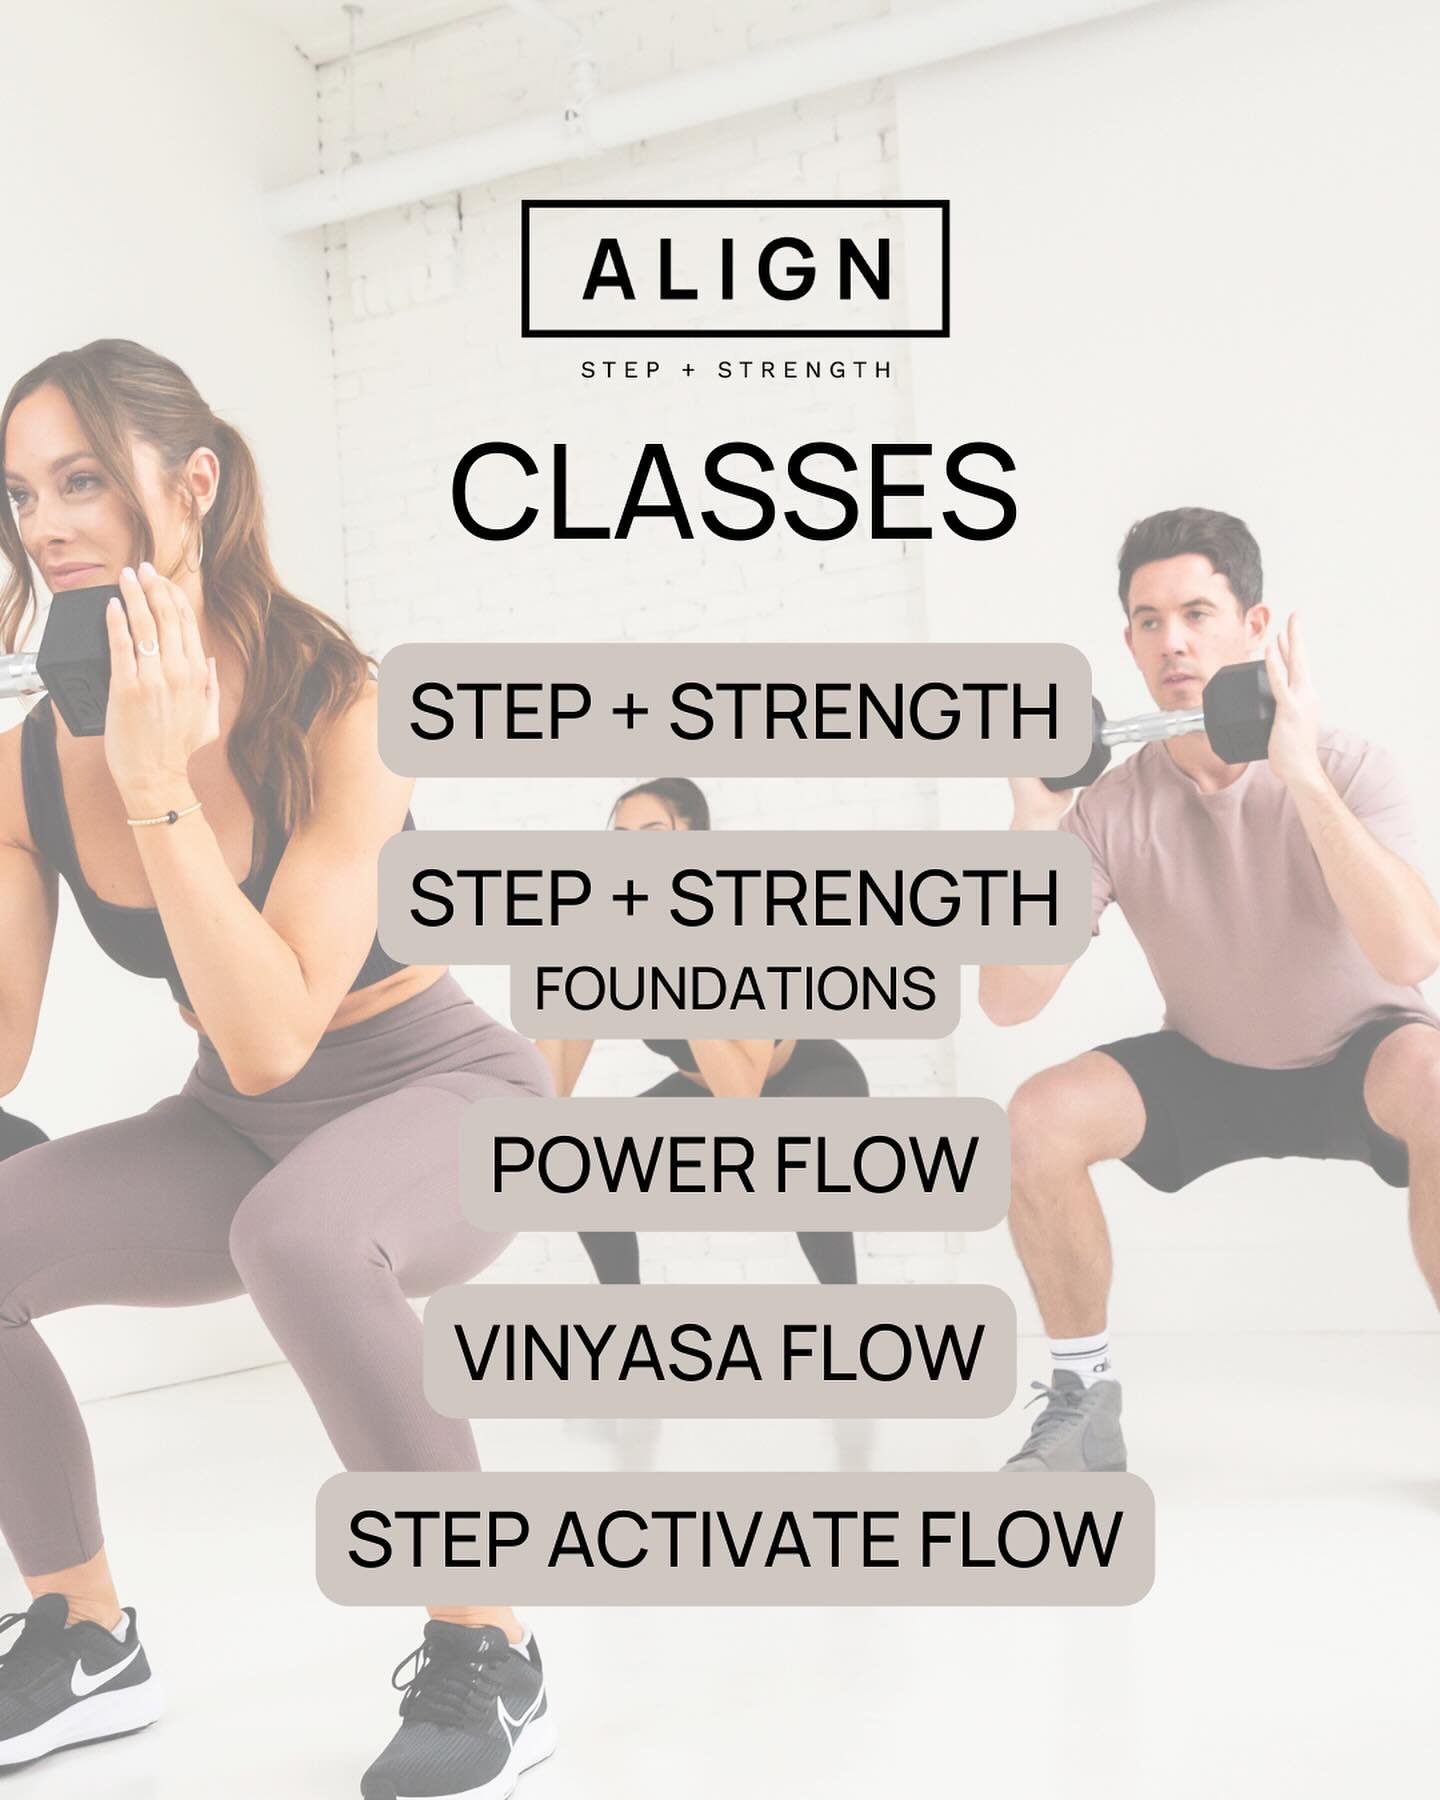 We are a Stairmaster and Strength Training class studio that also specializes in teaching Yoga.  We believe that all three training modalities (strength, cardio, yoga) are essential pieces to your whole body fitness and wellness. ⁣
⁣
Our schedule is 